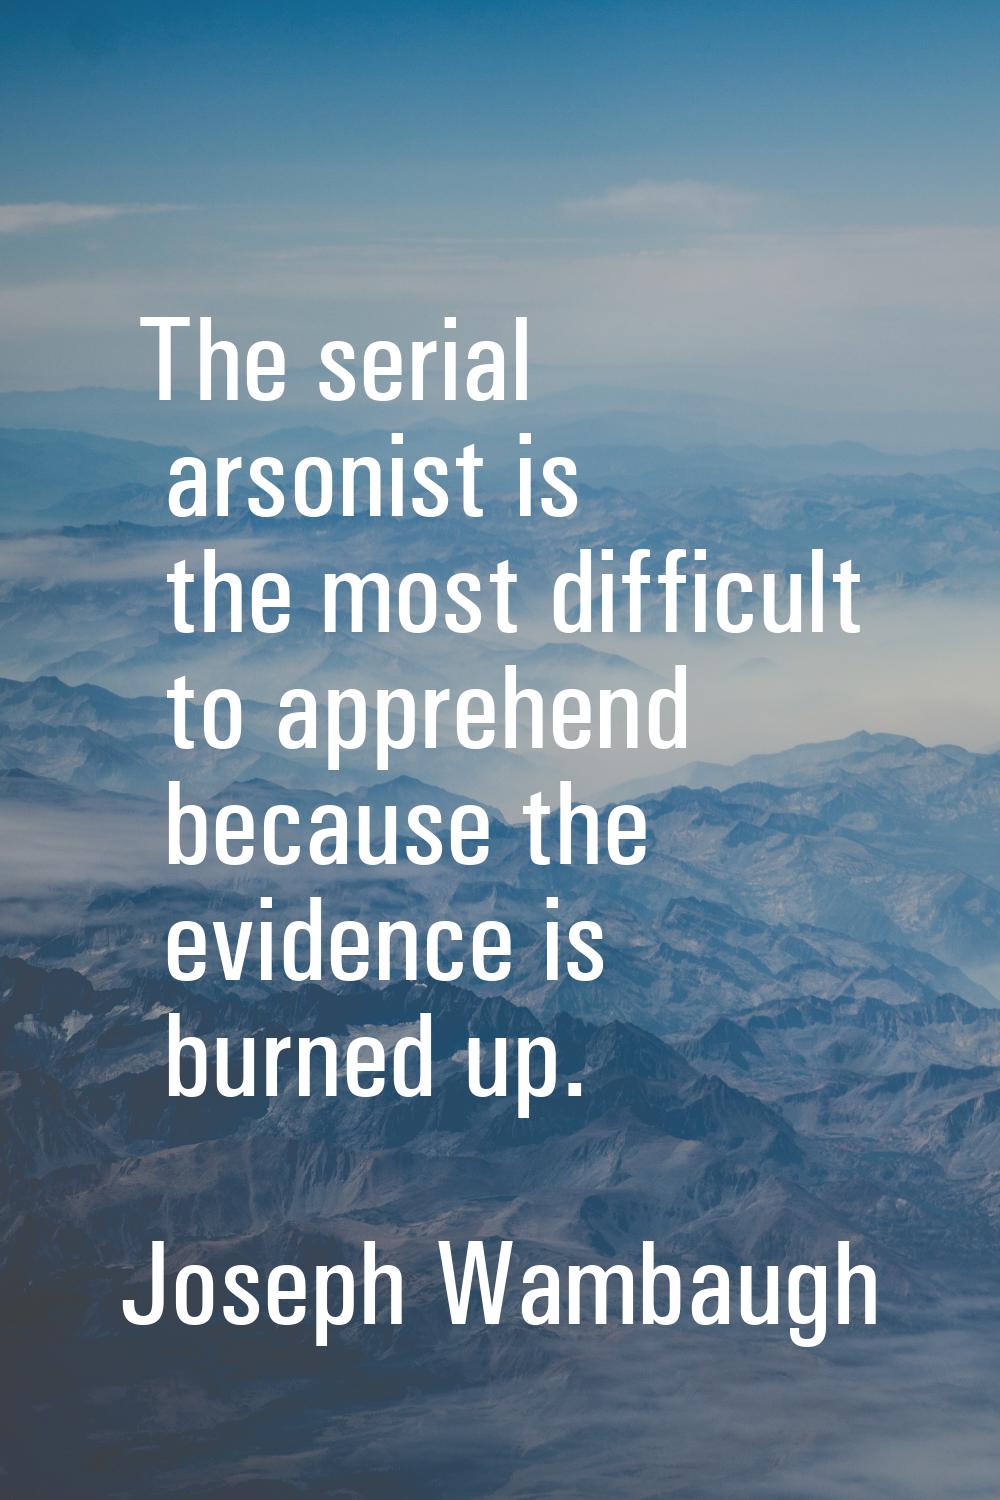 The serial arsonist is the most difficult to apprehend because the evidence is burned up.